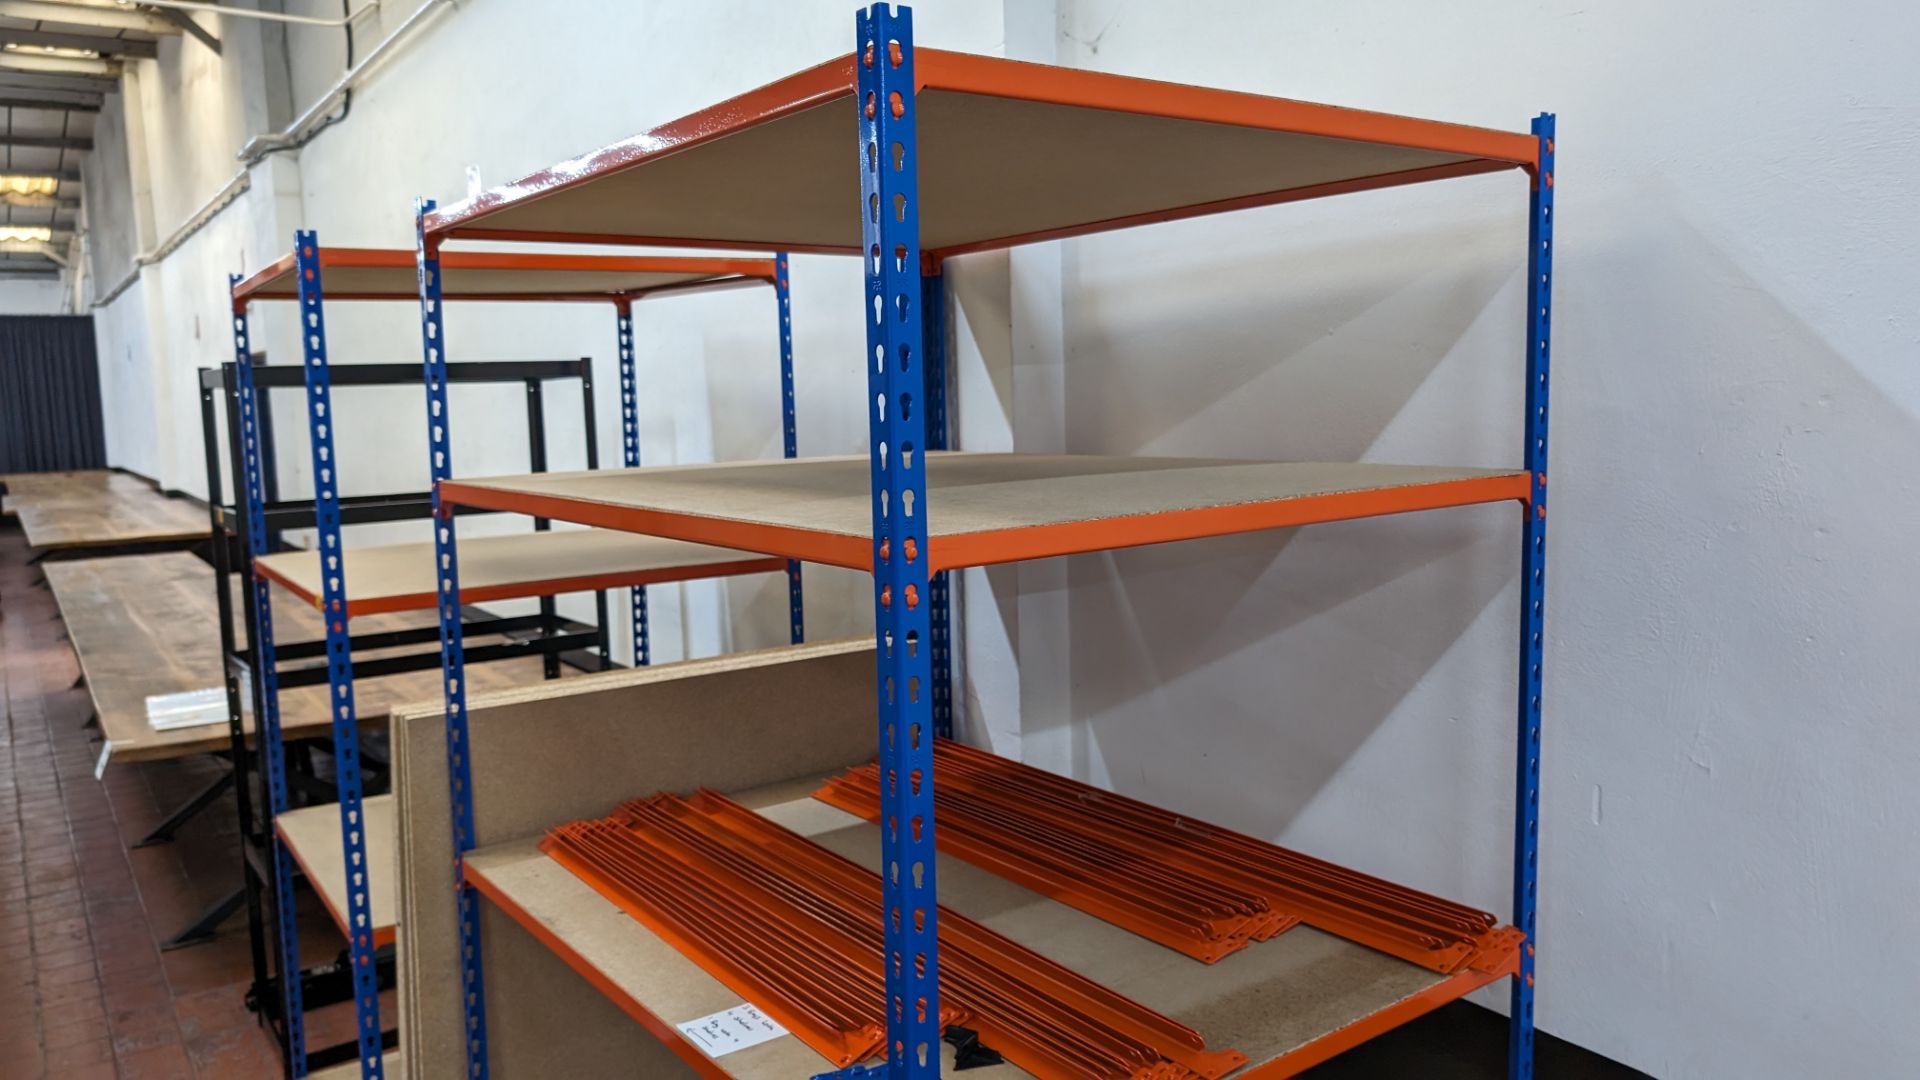 4 off bays of Rapid Racking blue and orange racking, each with four shelves. One bay has a footprin - Image 8 of 8